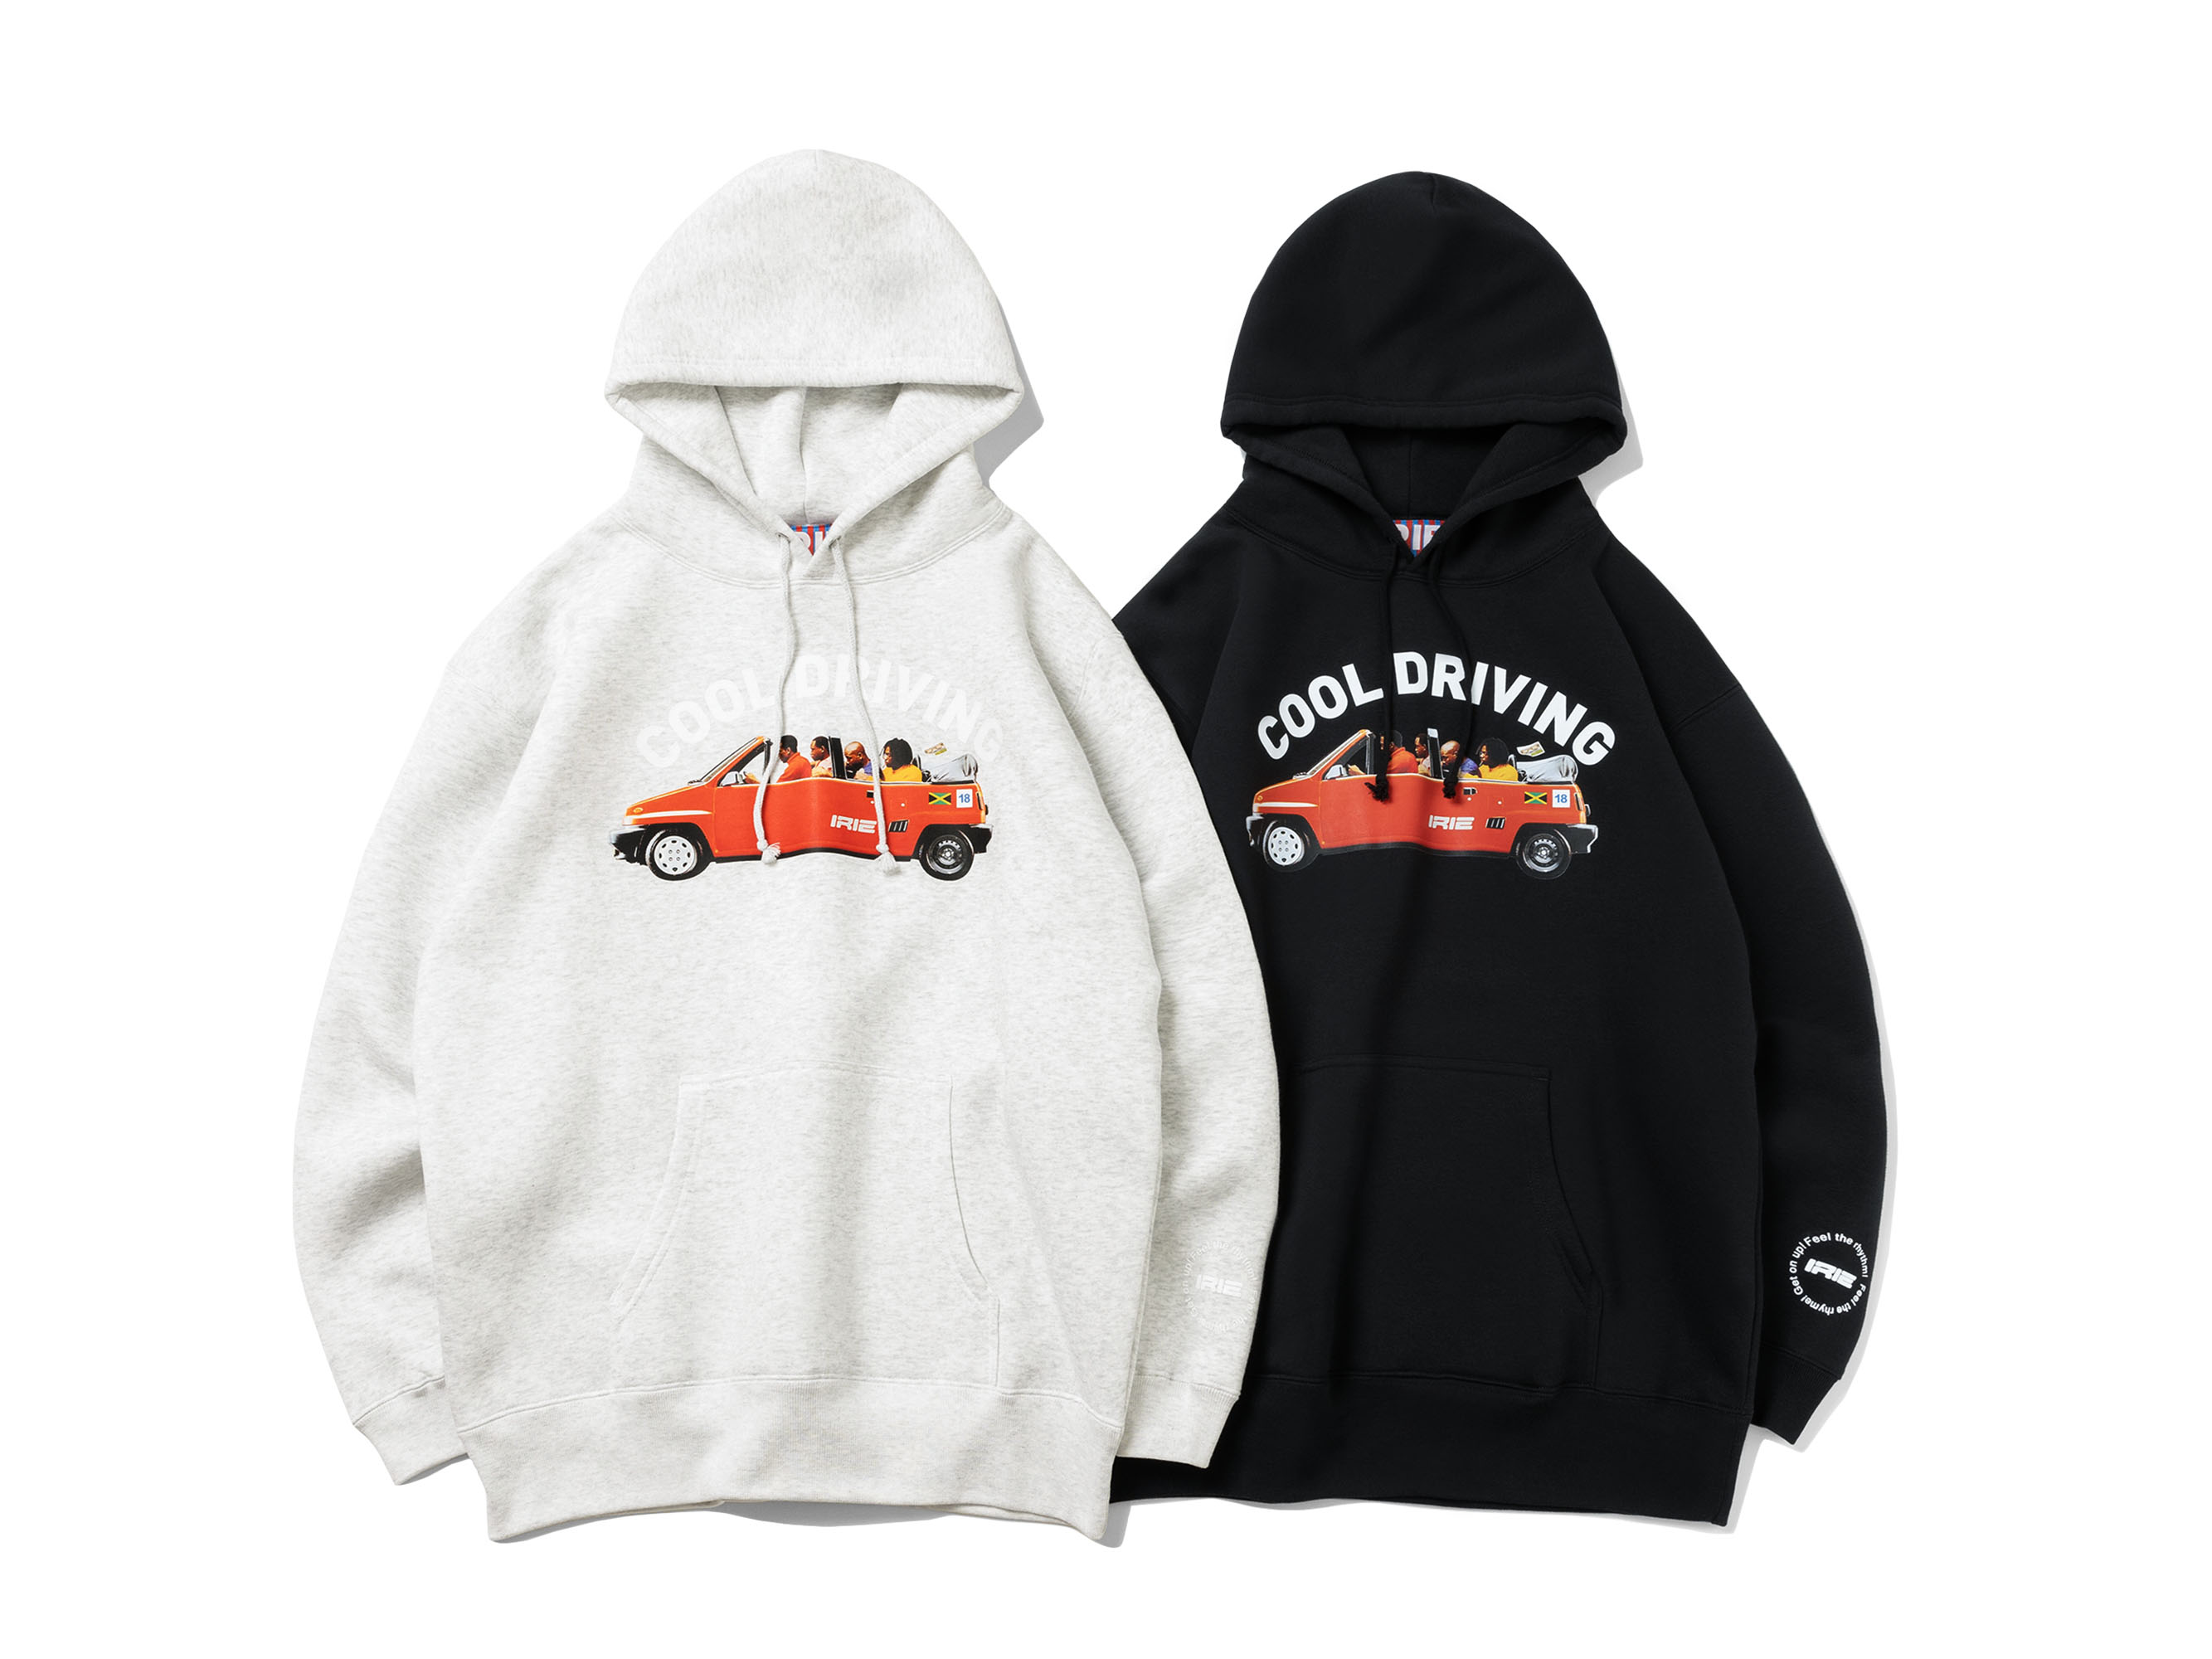 【40%OFF】COOL DRIVING HOODIE - IRIE by irielife